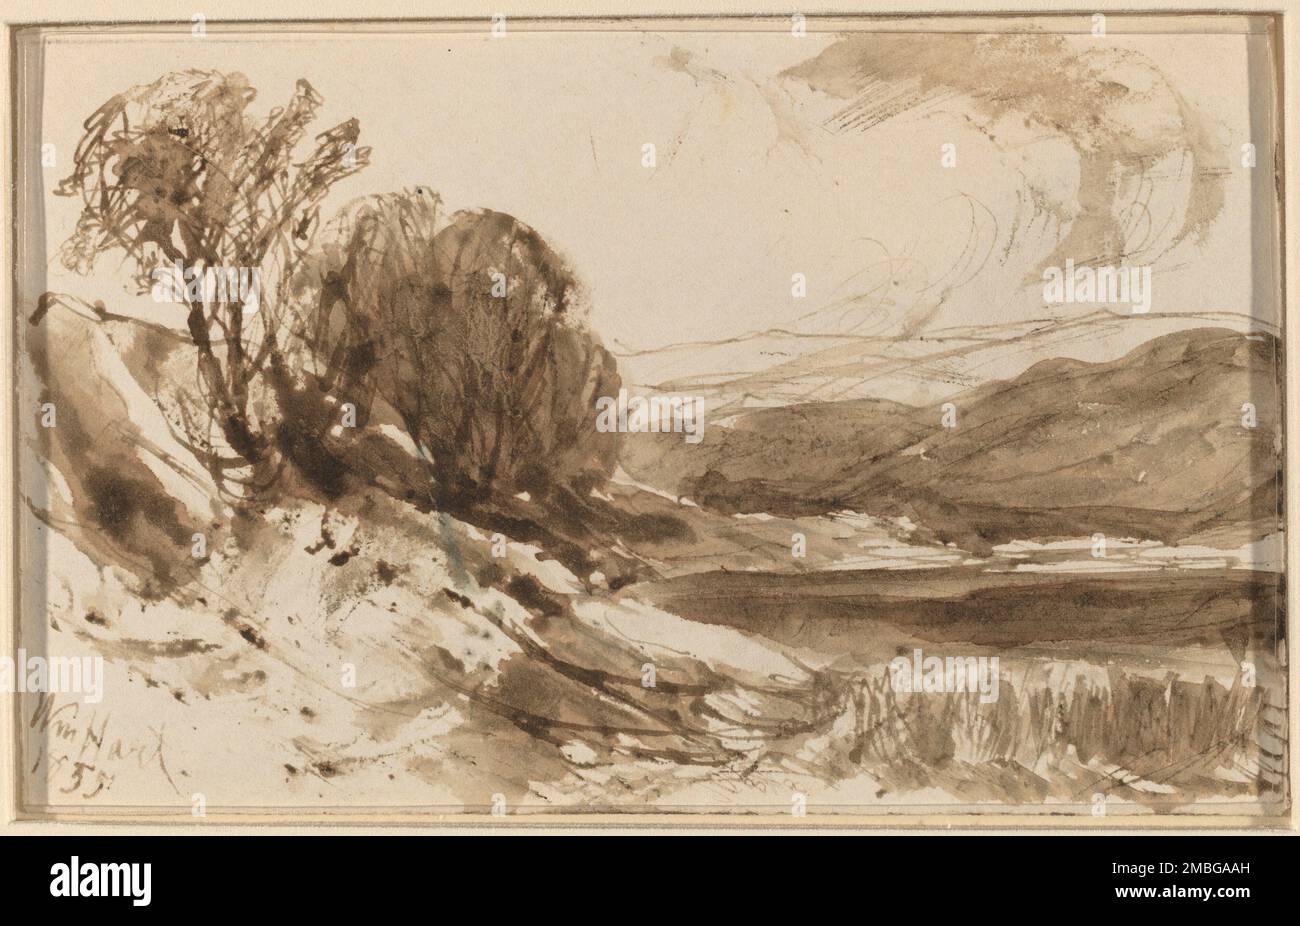 Hilly Landscape with Trees, 1855. Stock Photo